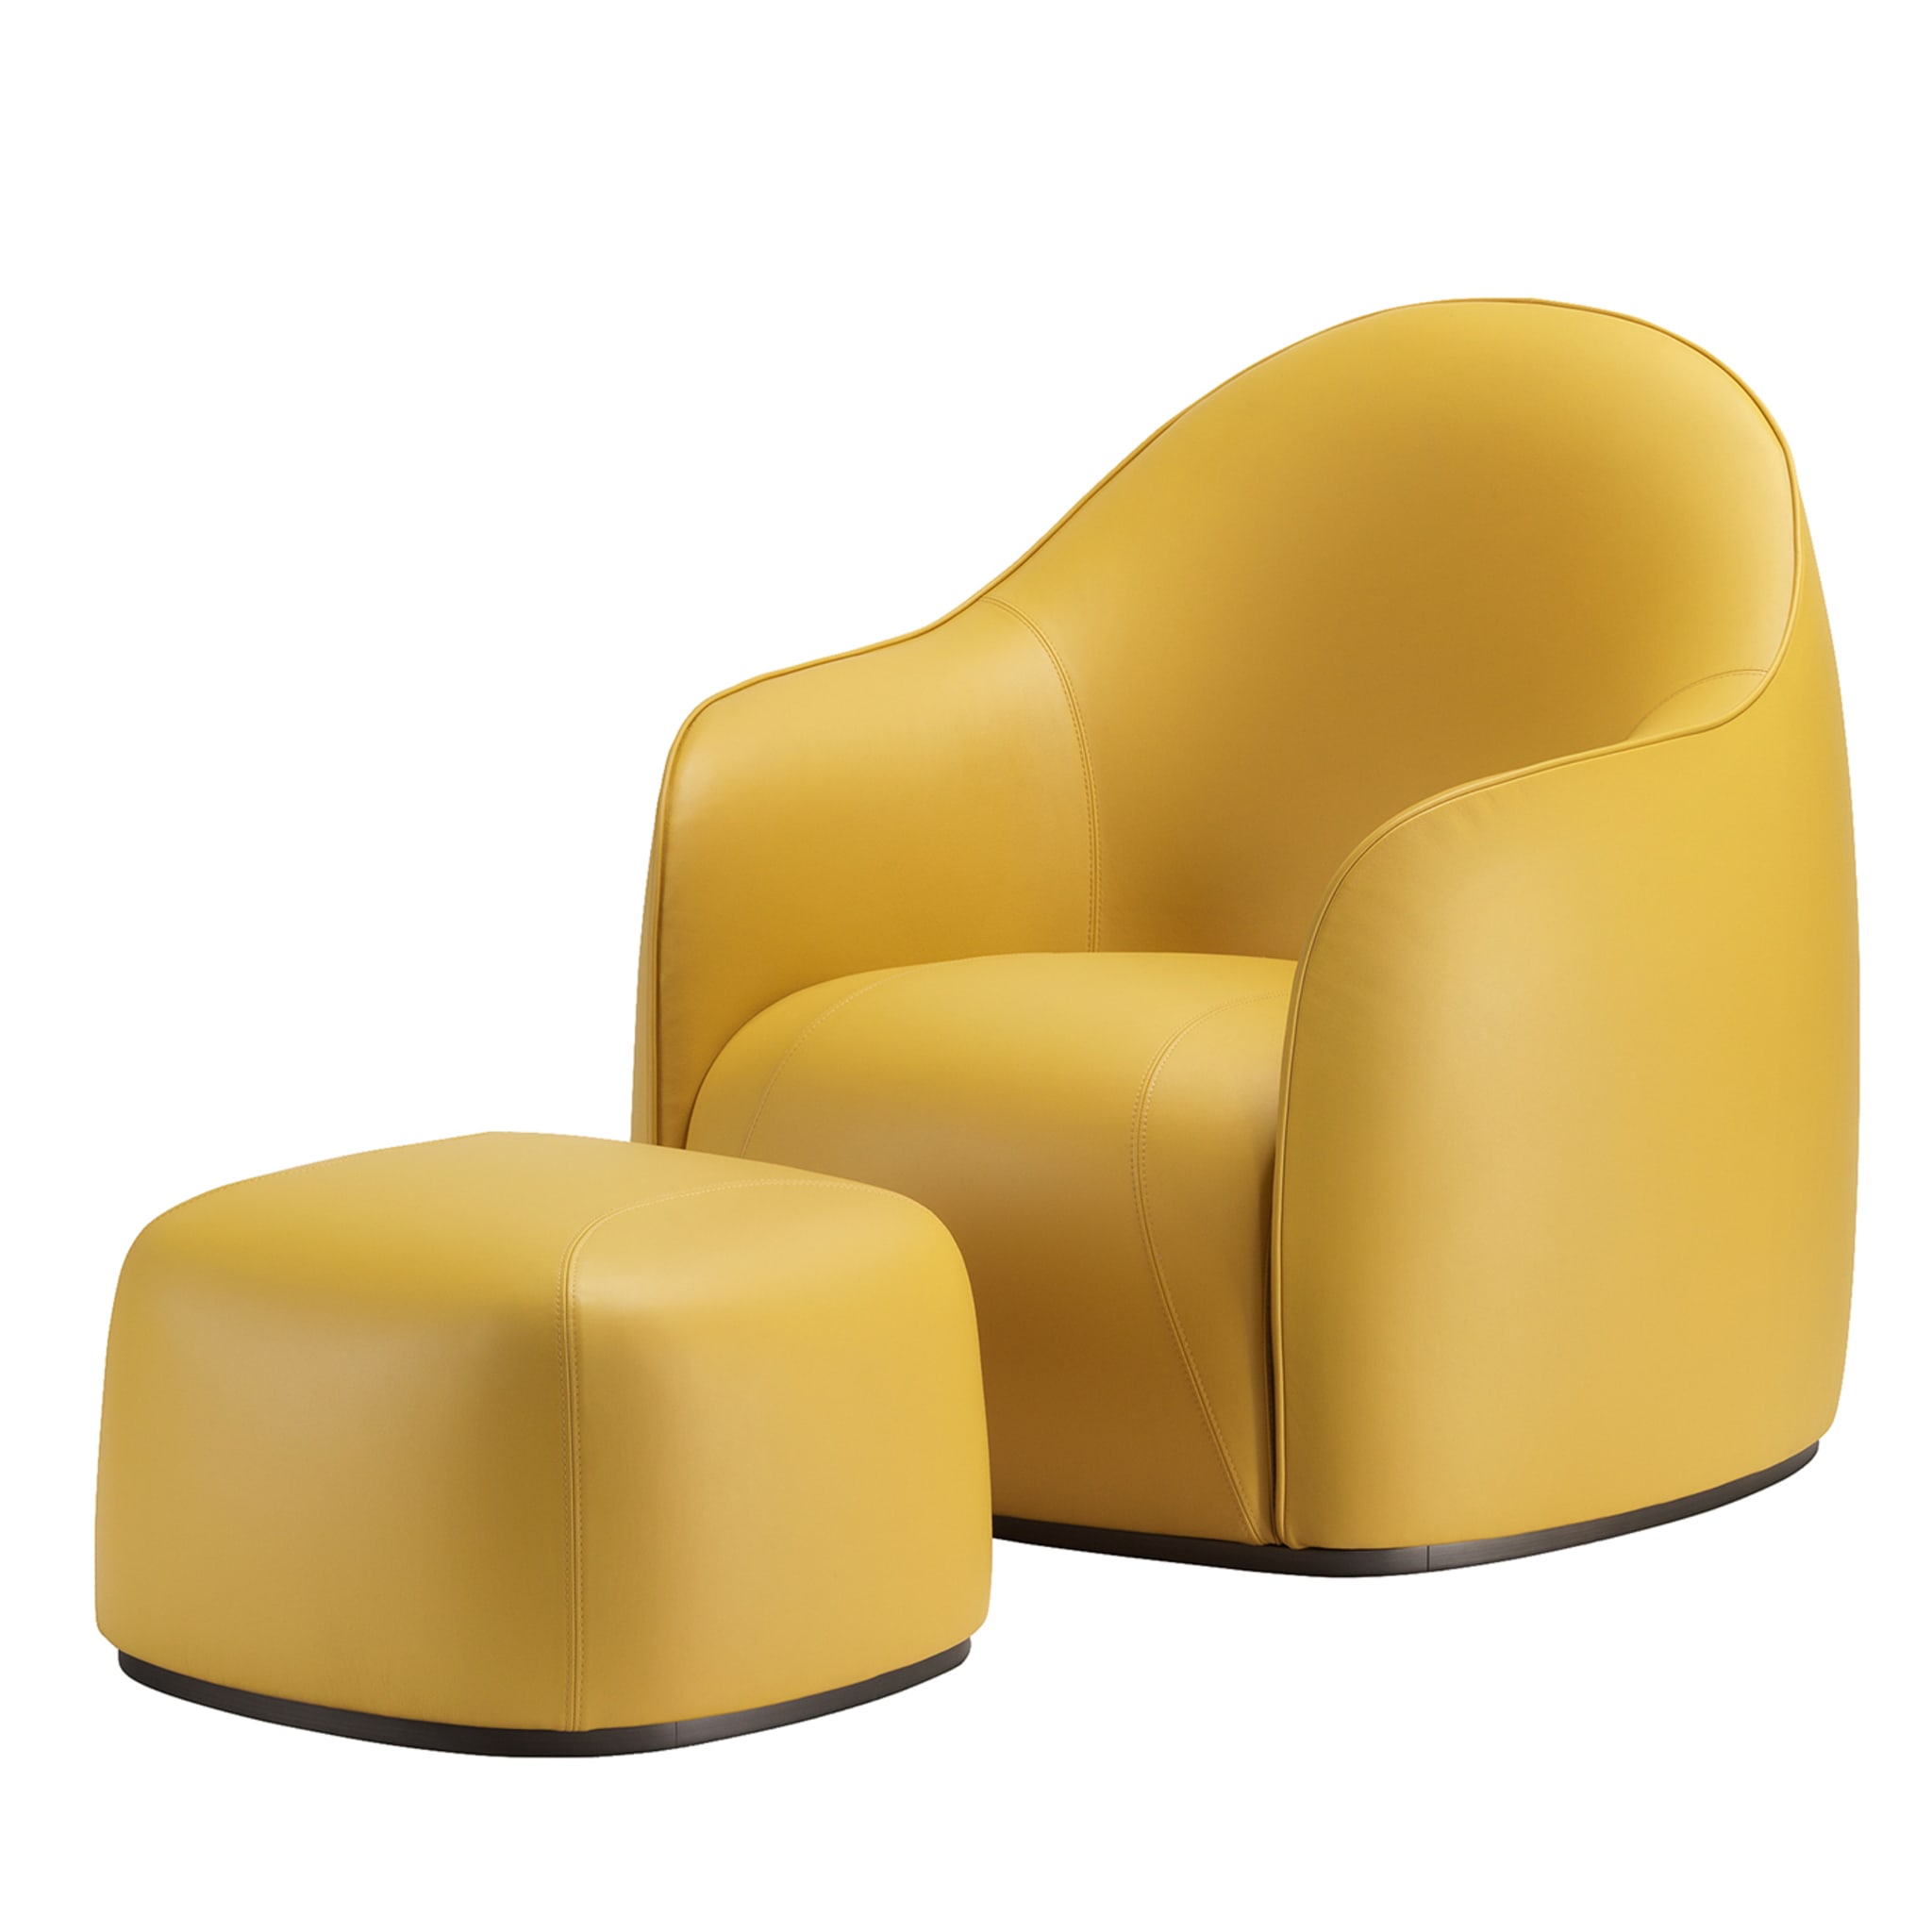 Sweet Set of Mustard Armchair and Pouf by Elisa Giovannoni - Vue principale